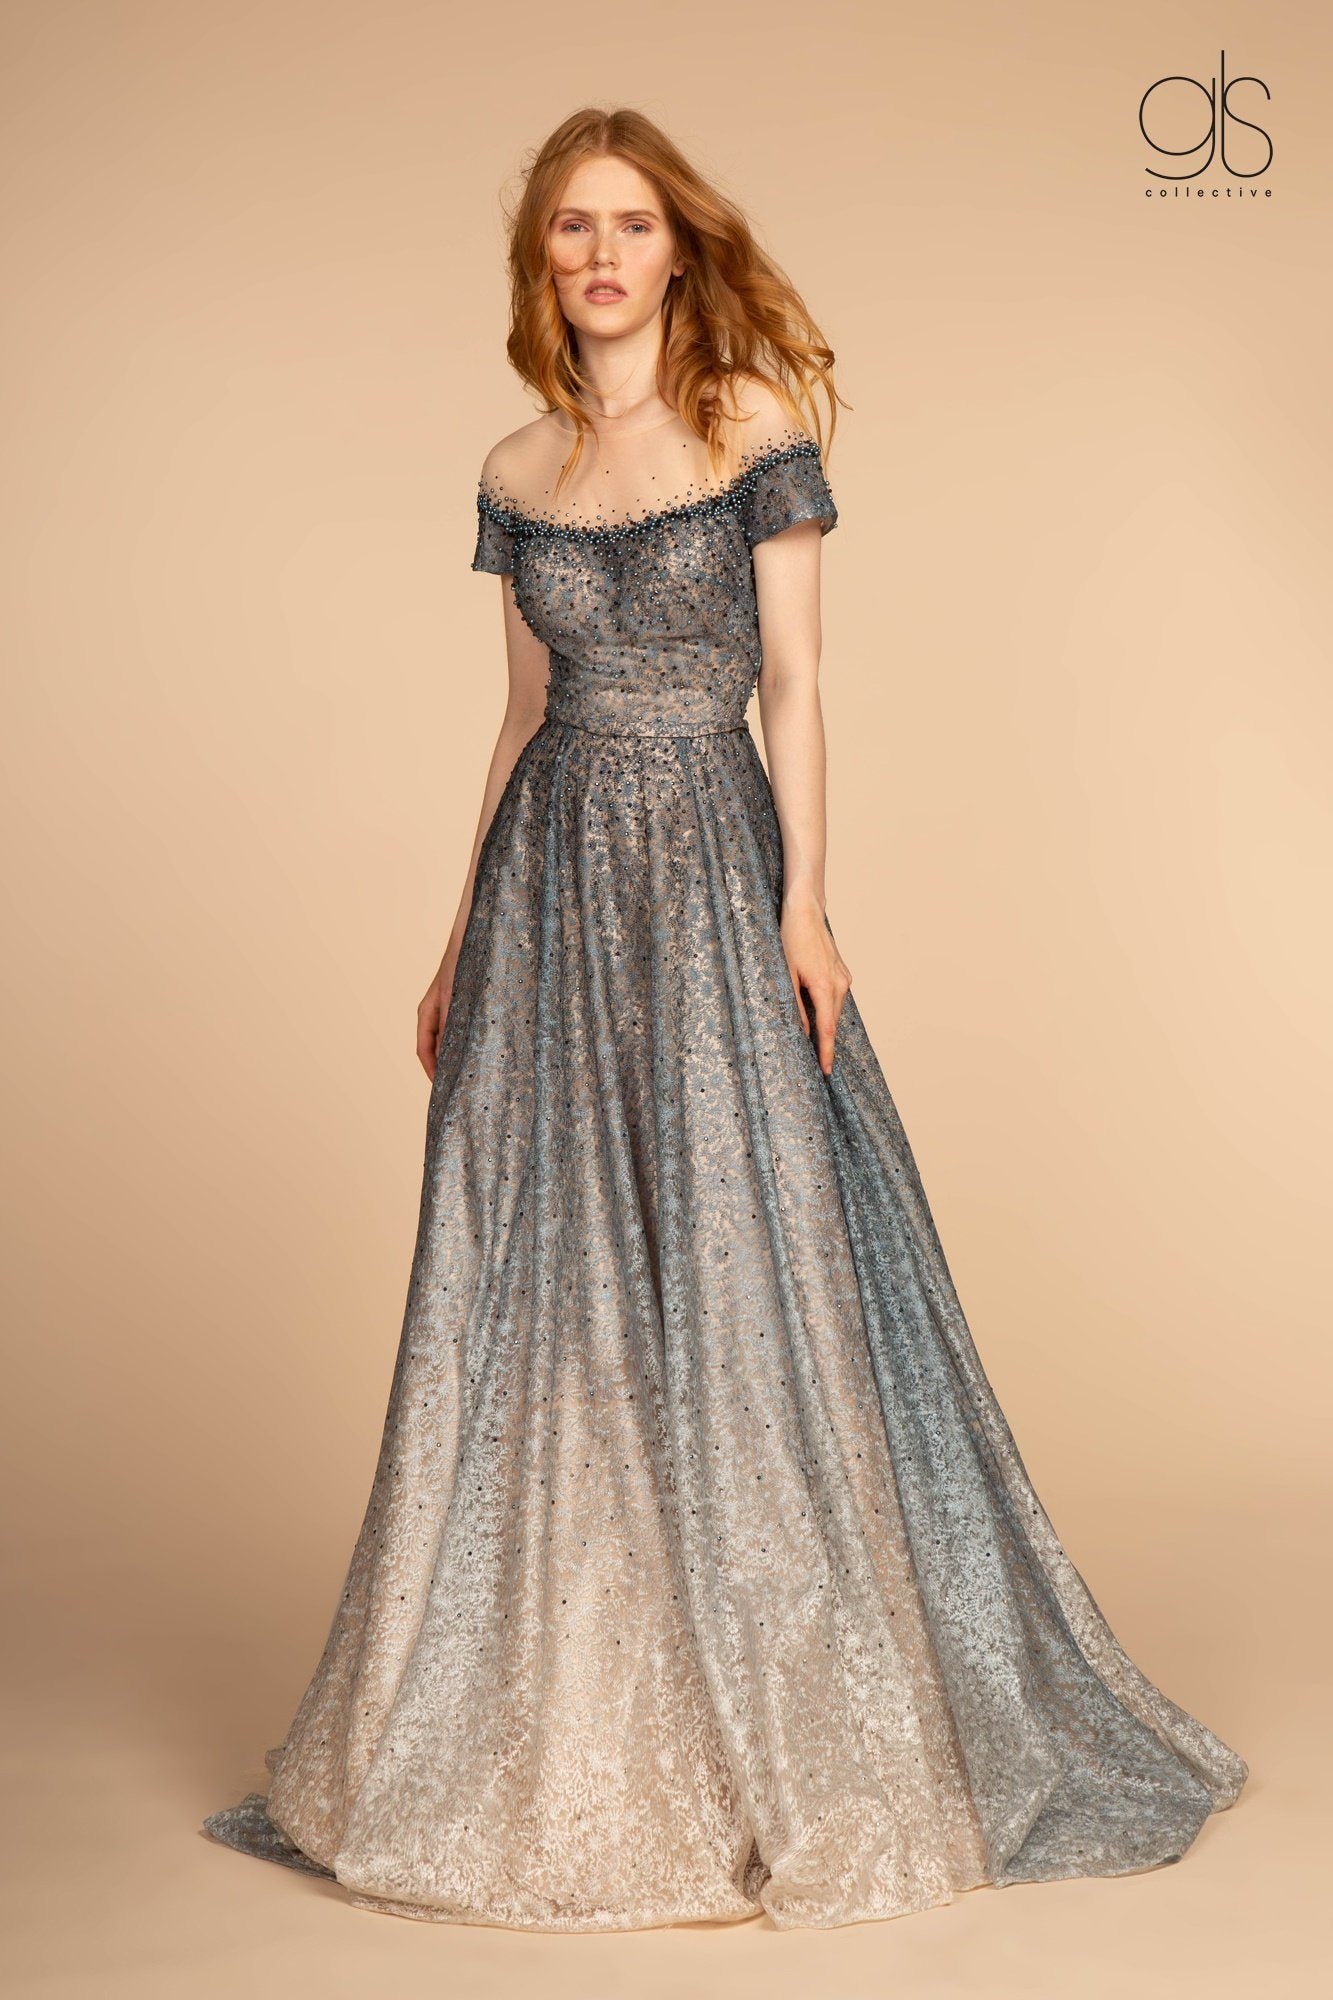 Two Tone Beaded Lace Gown with Short Sleeves by GLS Gloria GL2558